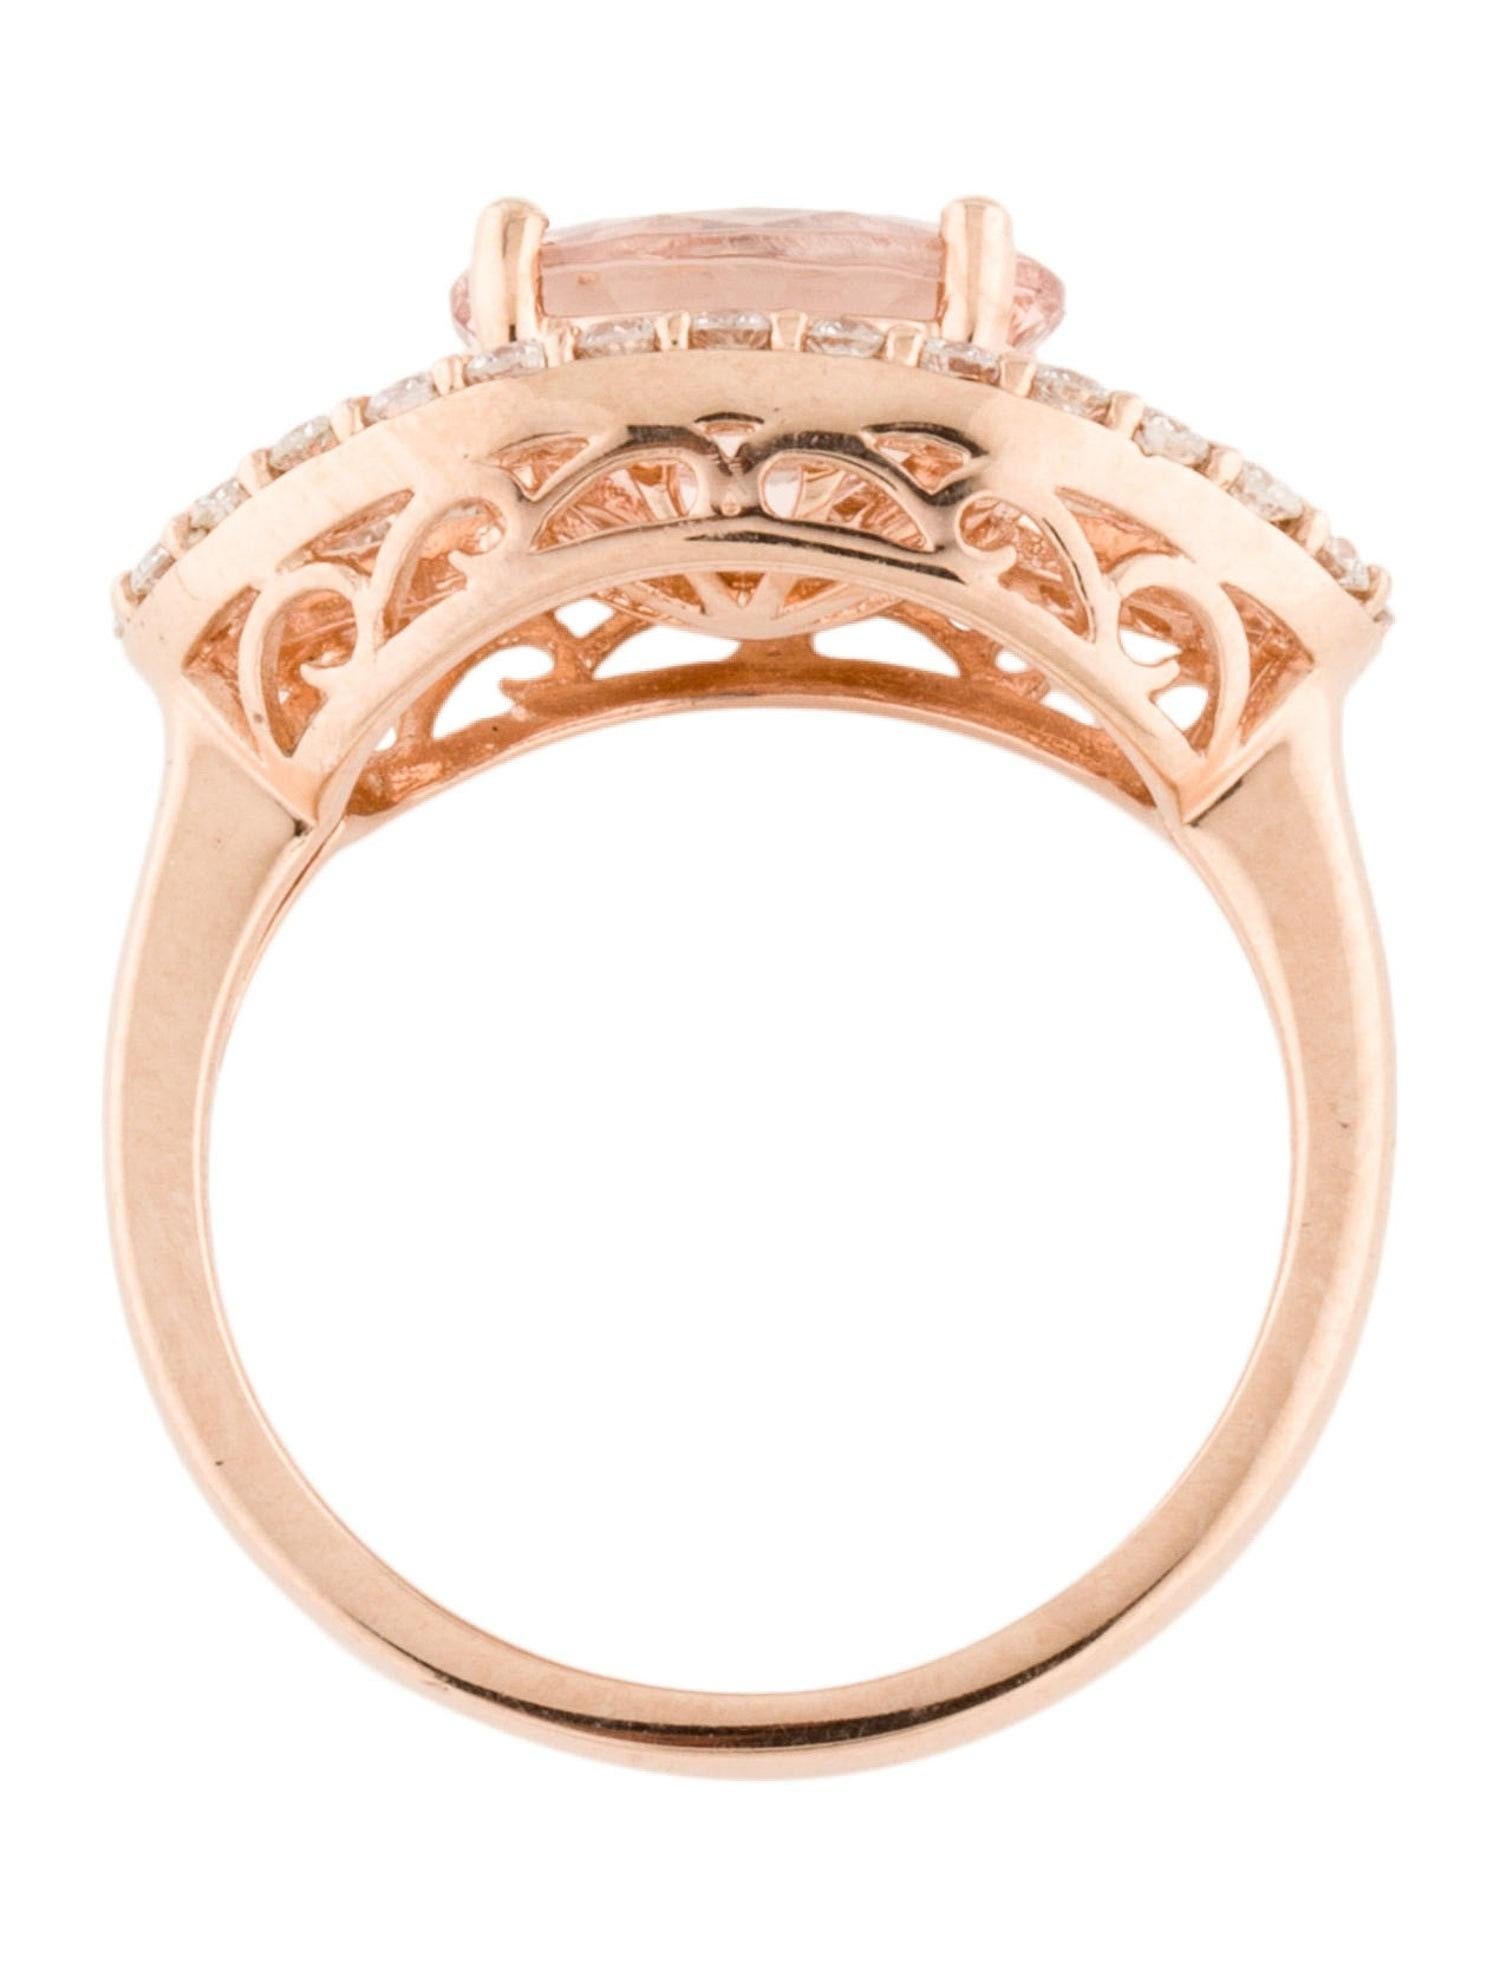 This is a magnificent morganite and diamond halo ring set in solid 14K rose gold. This east to west set 2.37 Ct morganite oval has an excellent peachy pink color (AAA quality gem) and is surrounded by a unique infinity style diamond halo. The ring